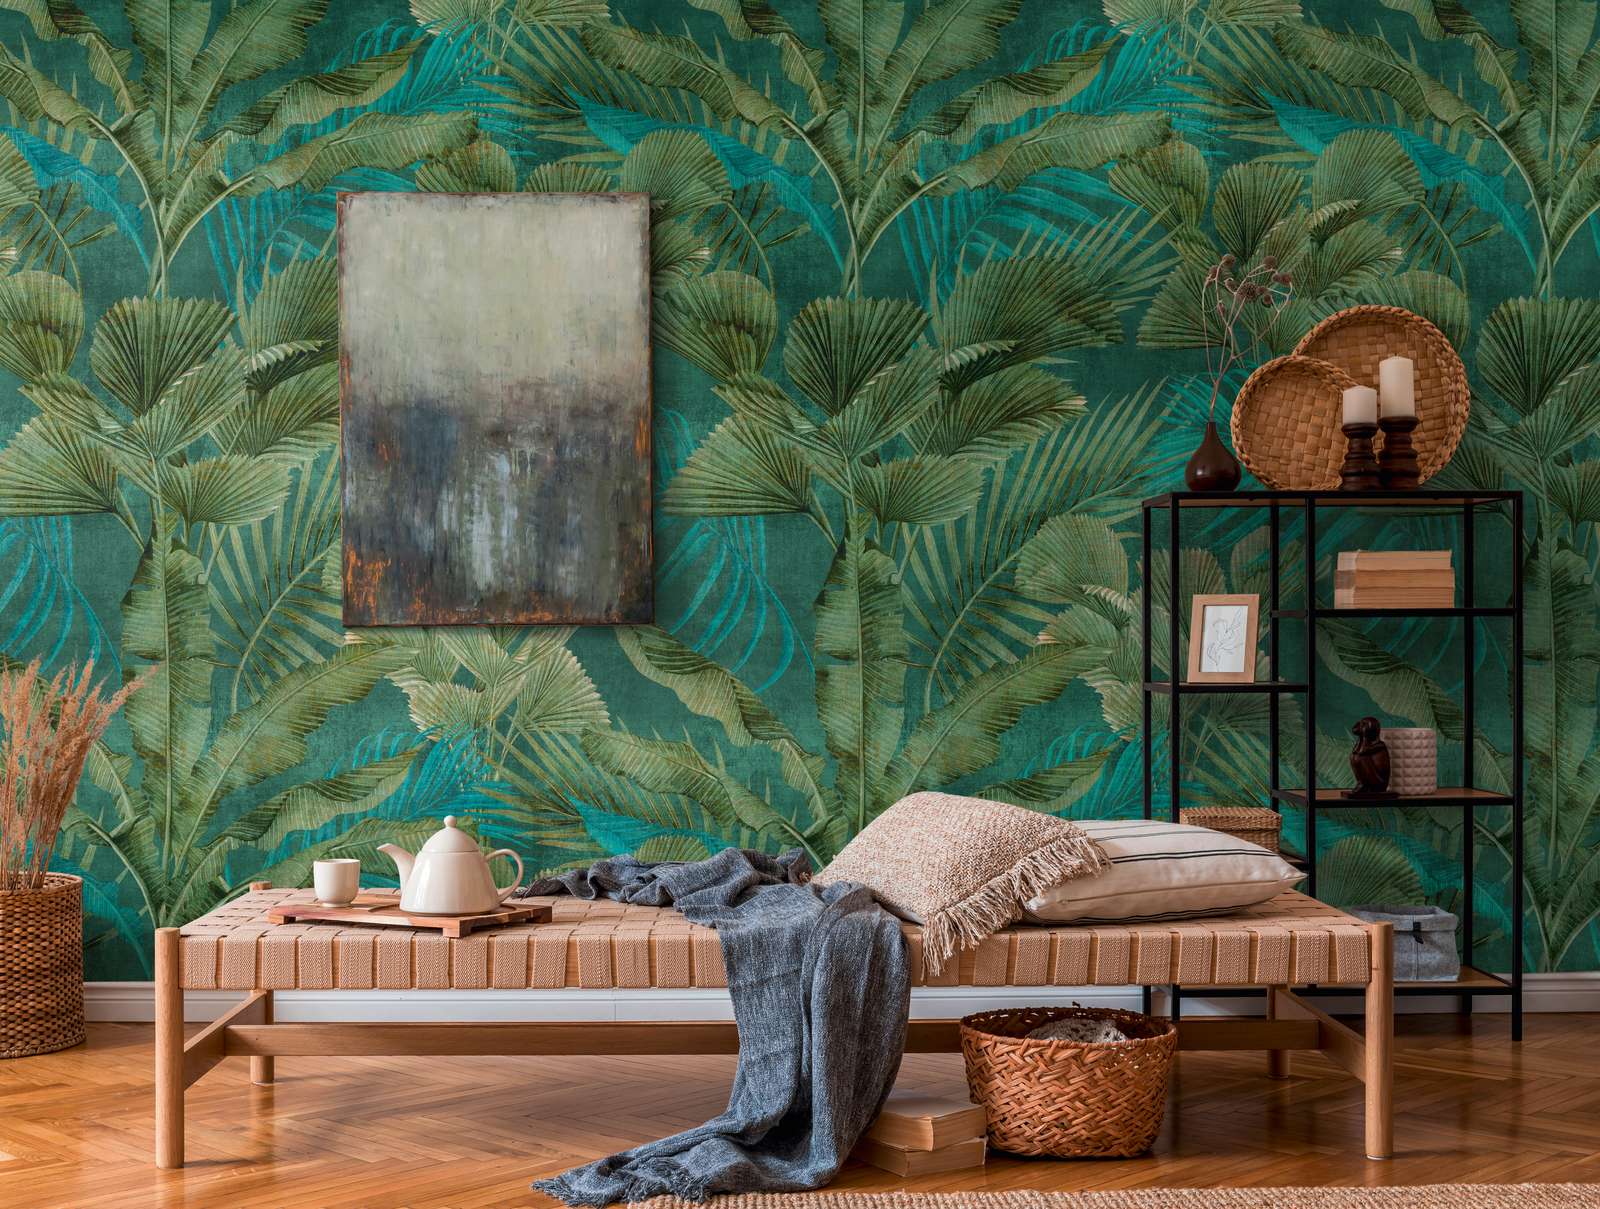             Non-woven wallpaper with various jungle leaves - green, blue
        